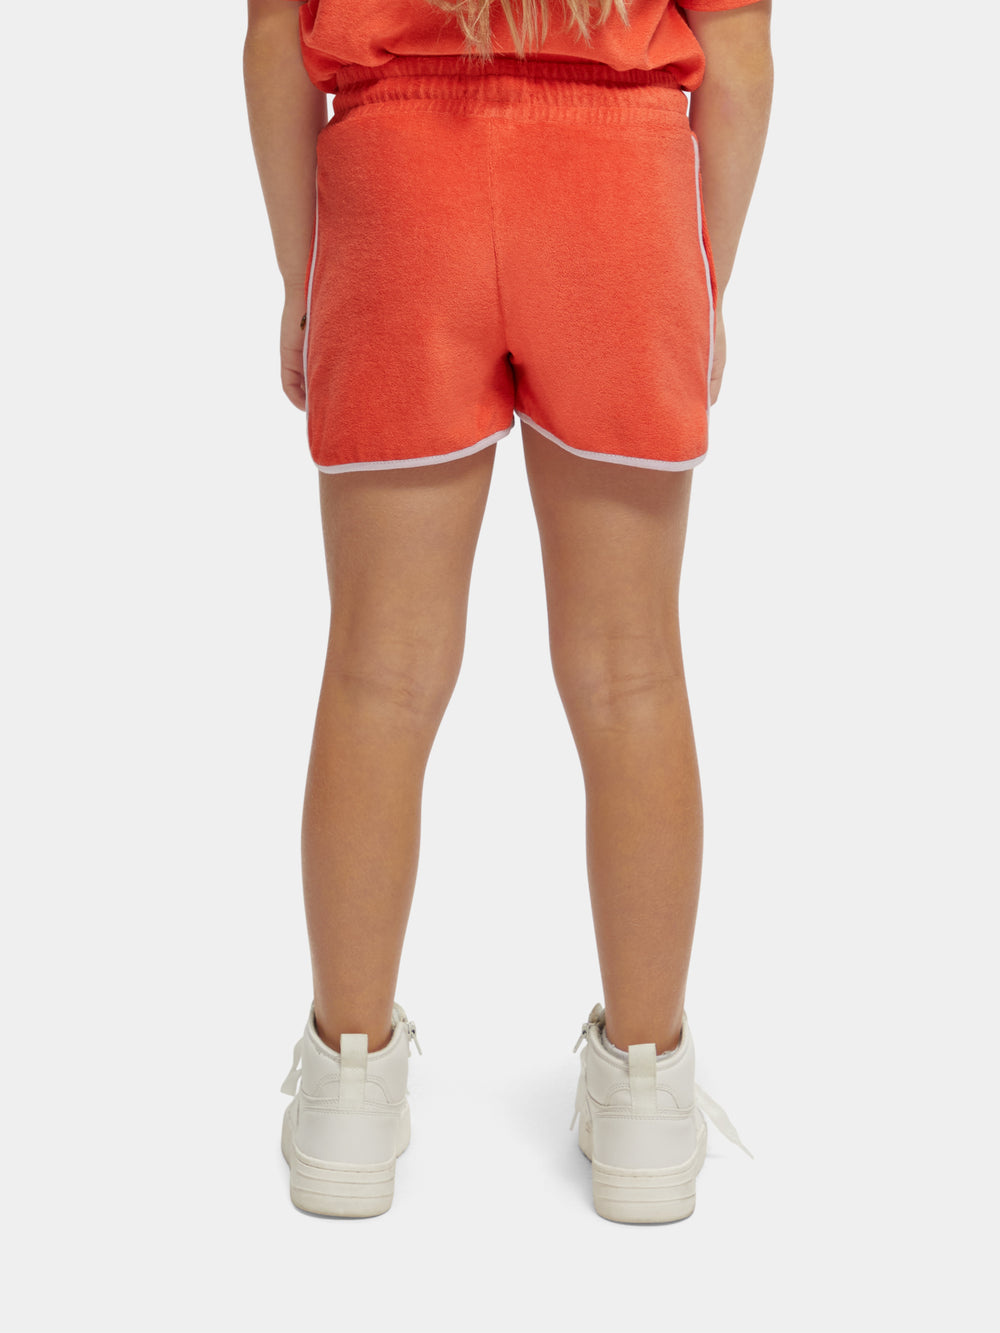 Relaxed fit towelling shorts - Scotch & Soda NZ